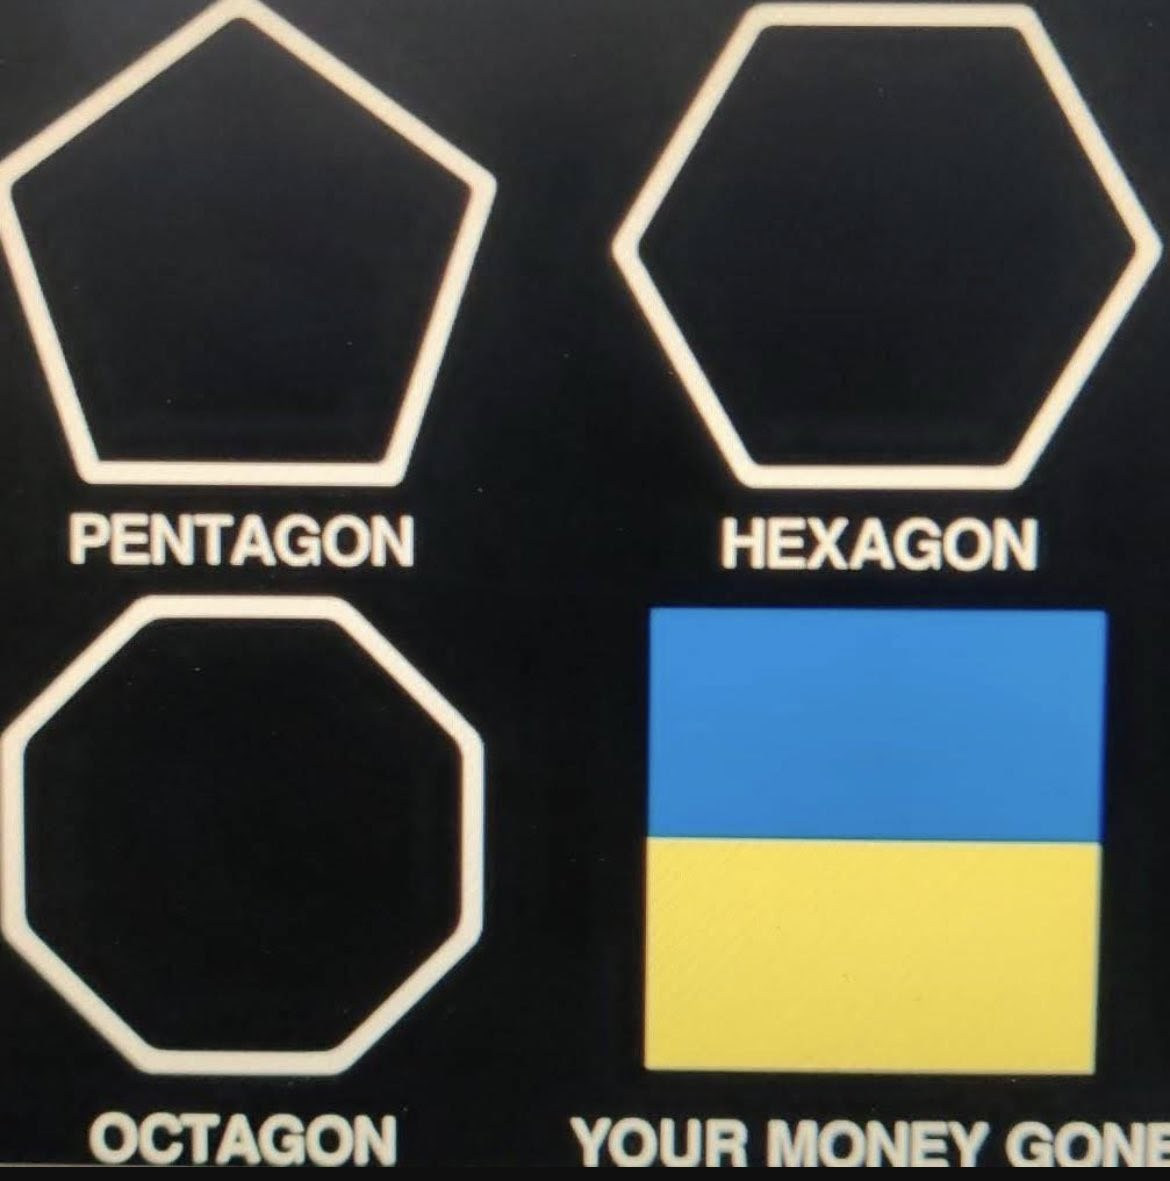 Meme showing shapes and Ukraine flag as one of them.